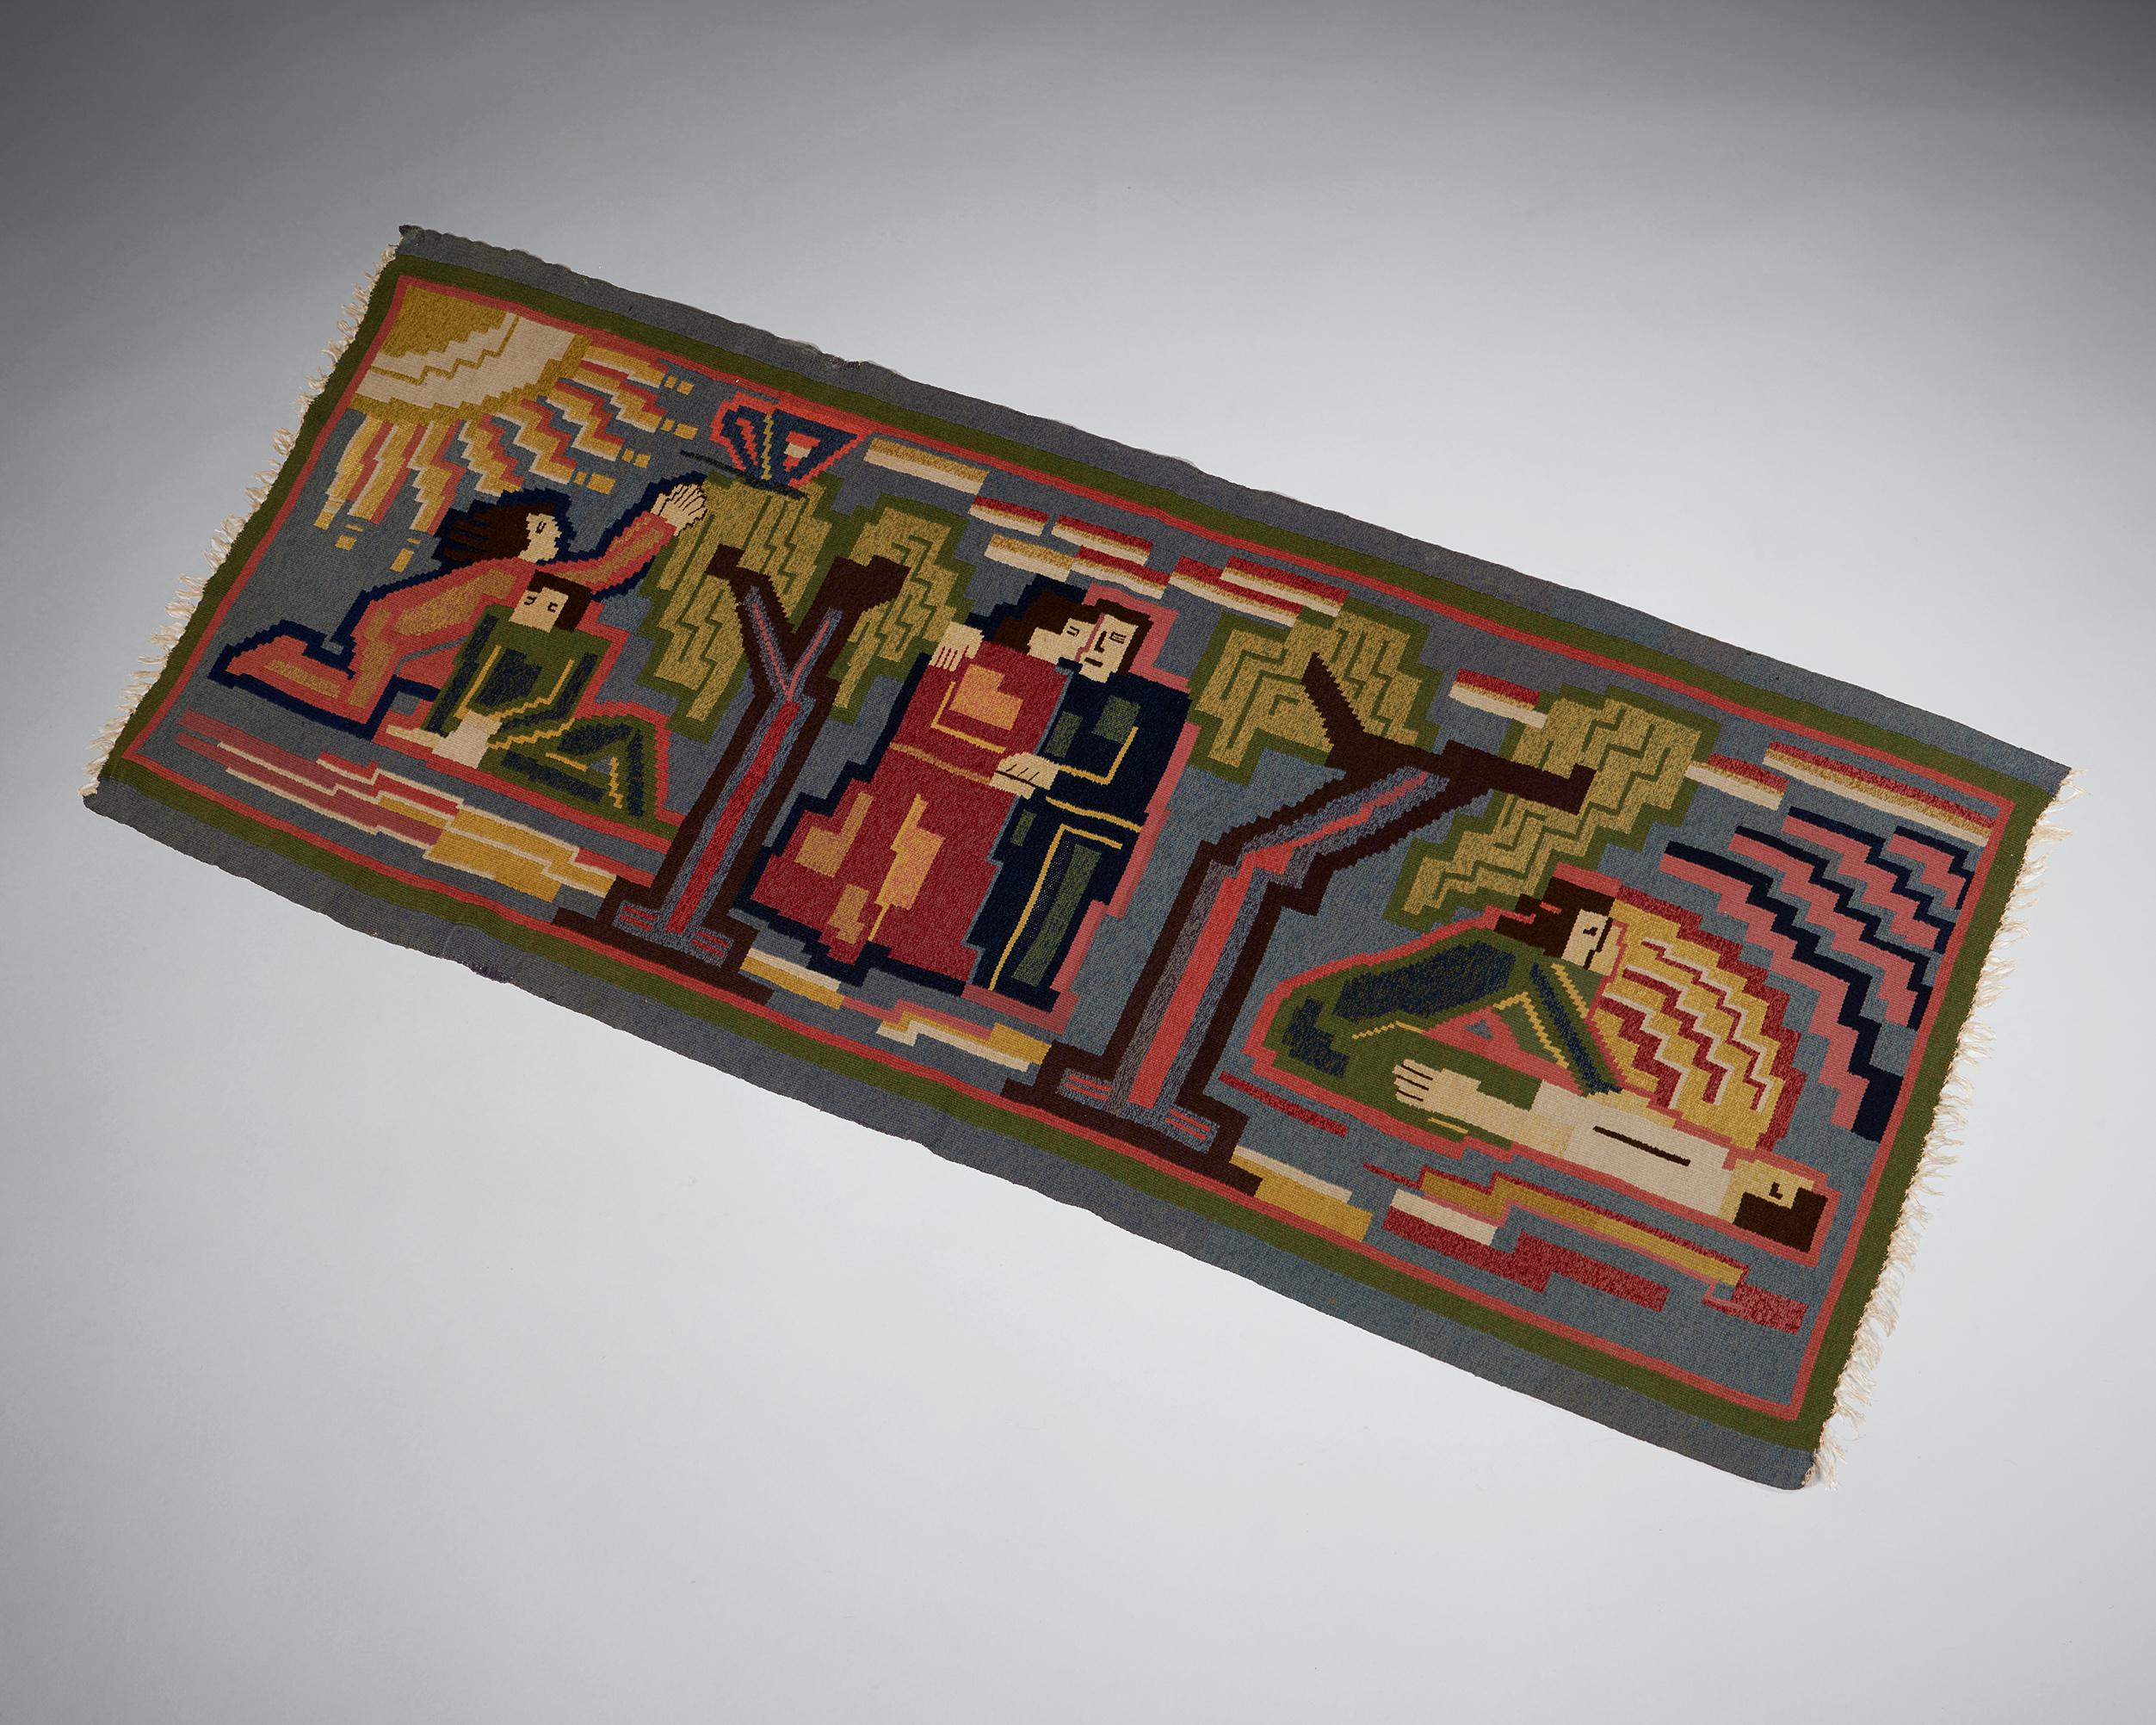 Tapestry ‘Three Ages’ designed by Nils Nilsson,
Belgium. 1920s.

Handwoven wool.

Measurements: 
H: 71 cm / 2' 4